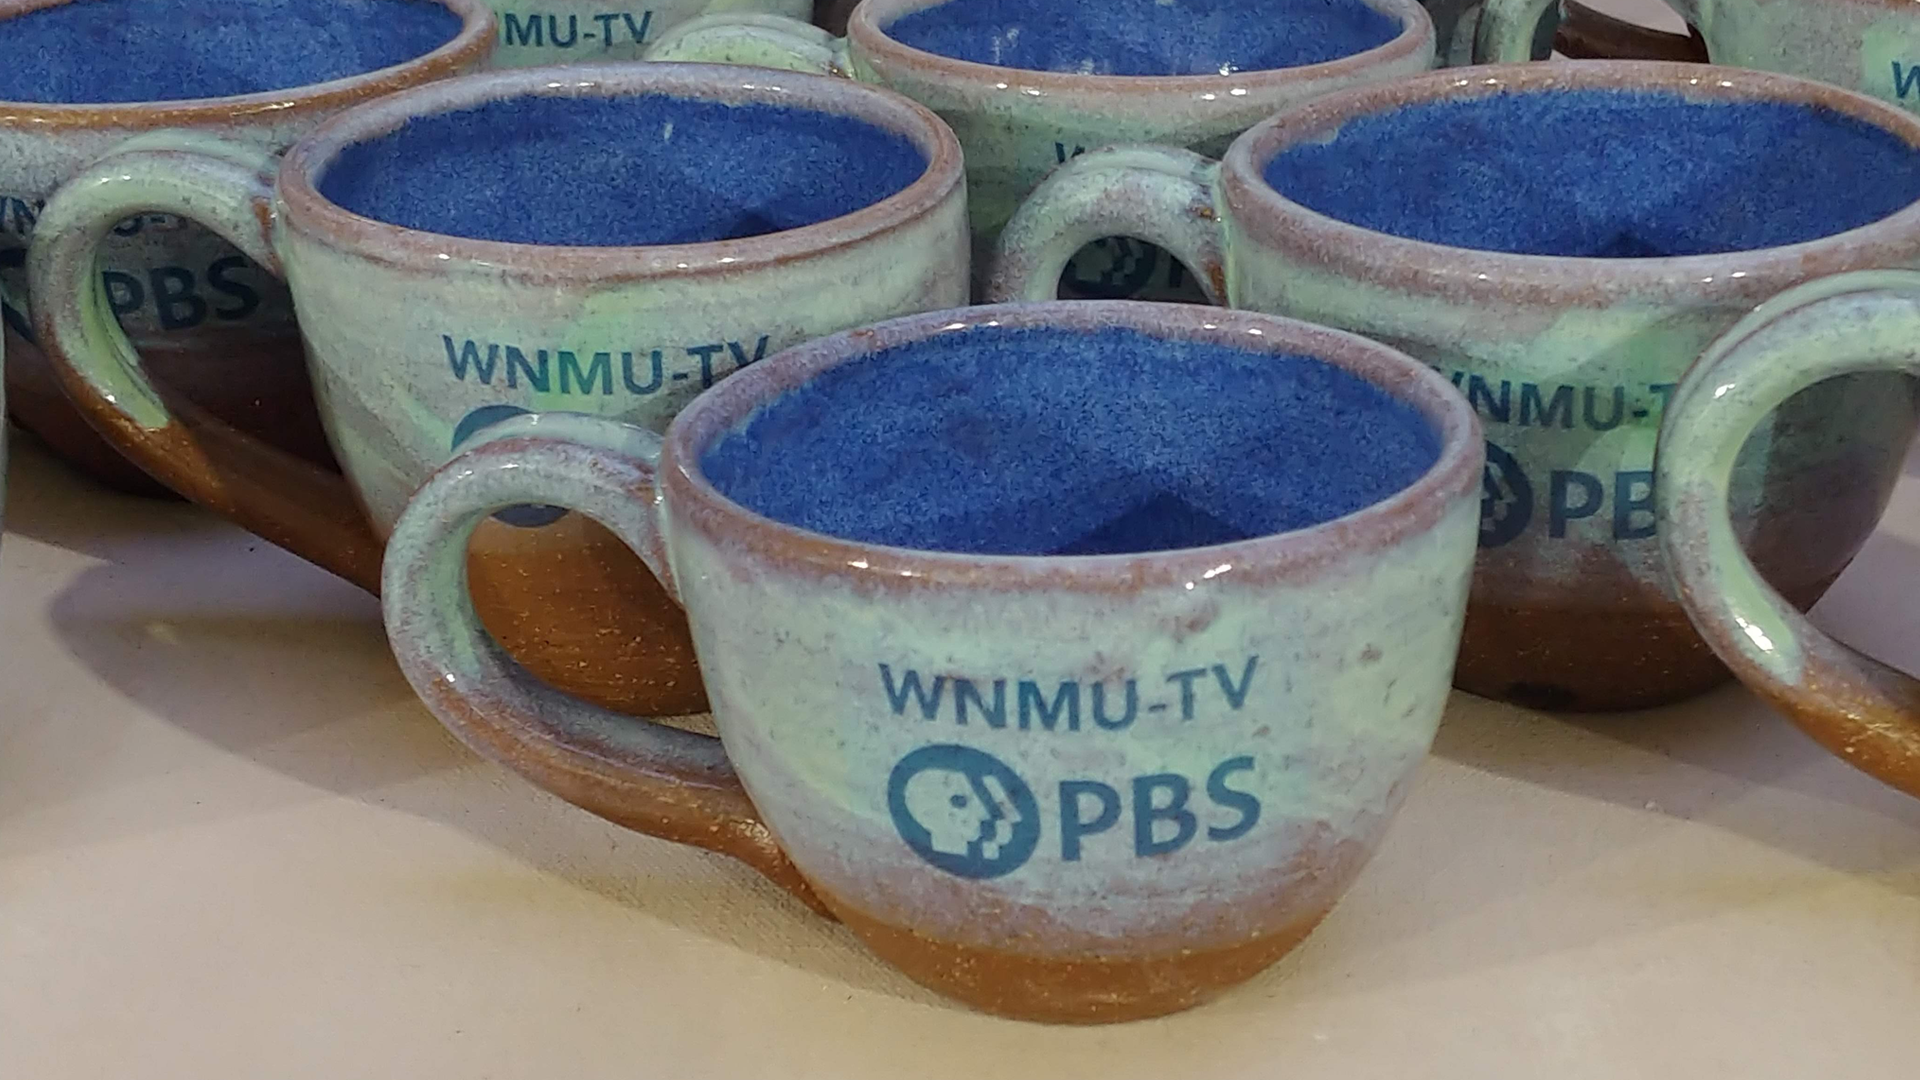 WNMU-TV Hand Crafted Ceramic Mugs Now Available